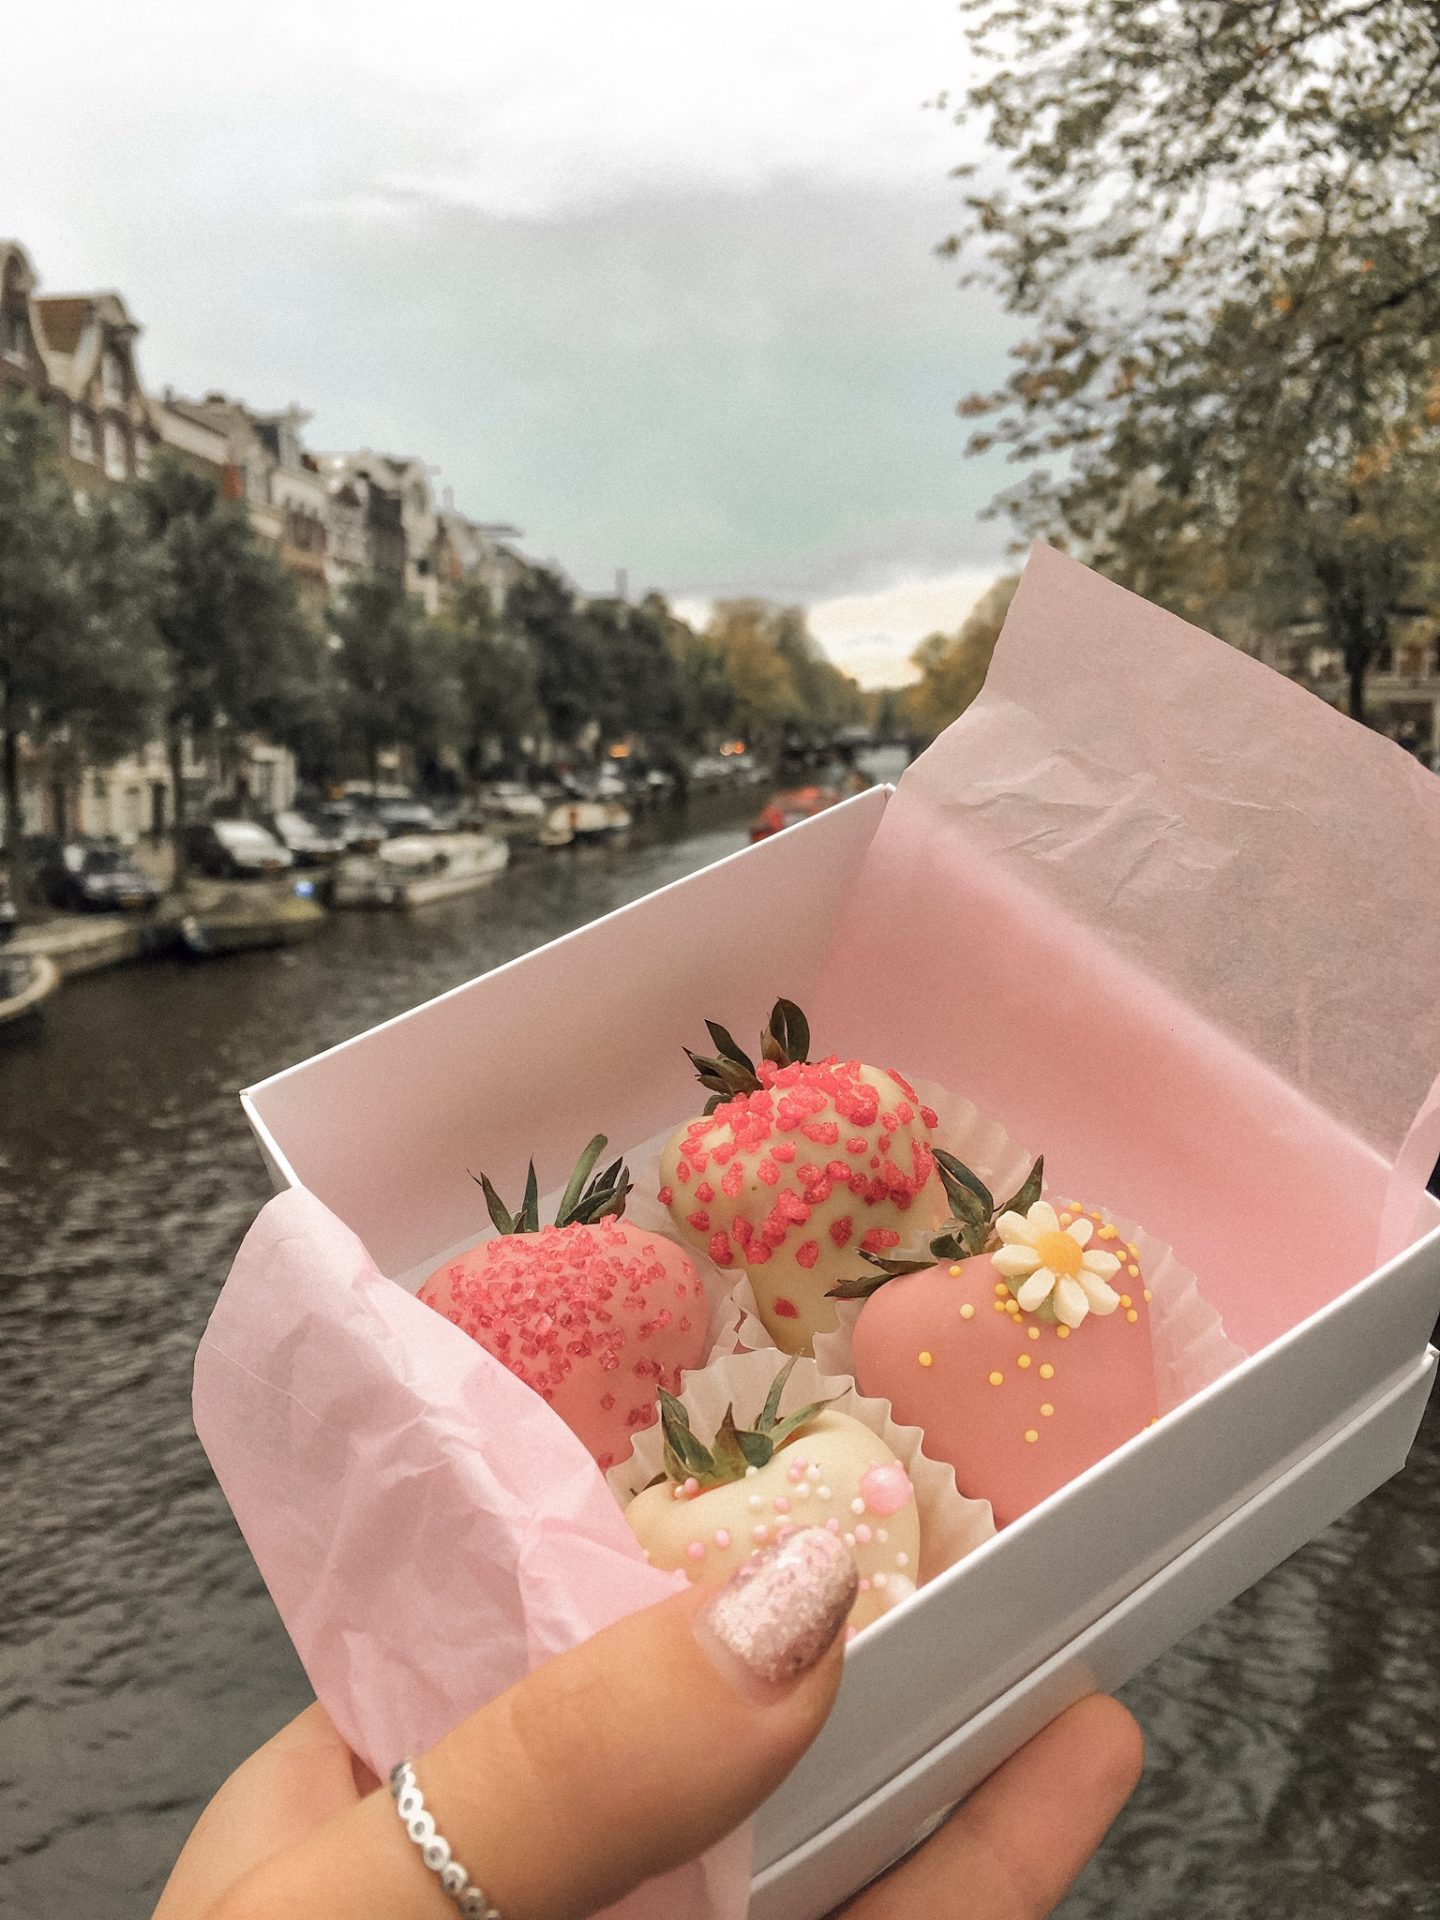 Chocolate-covered strawberries from Polaberry in Amsterdam